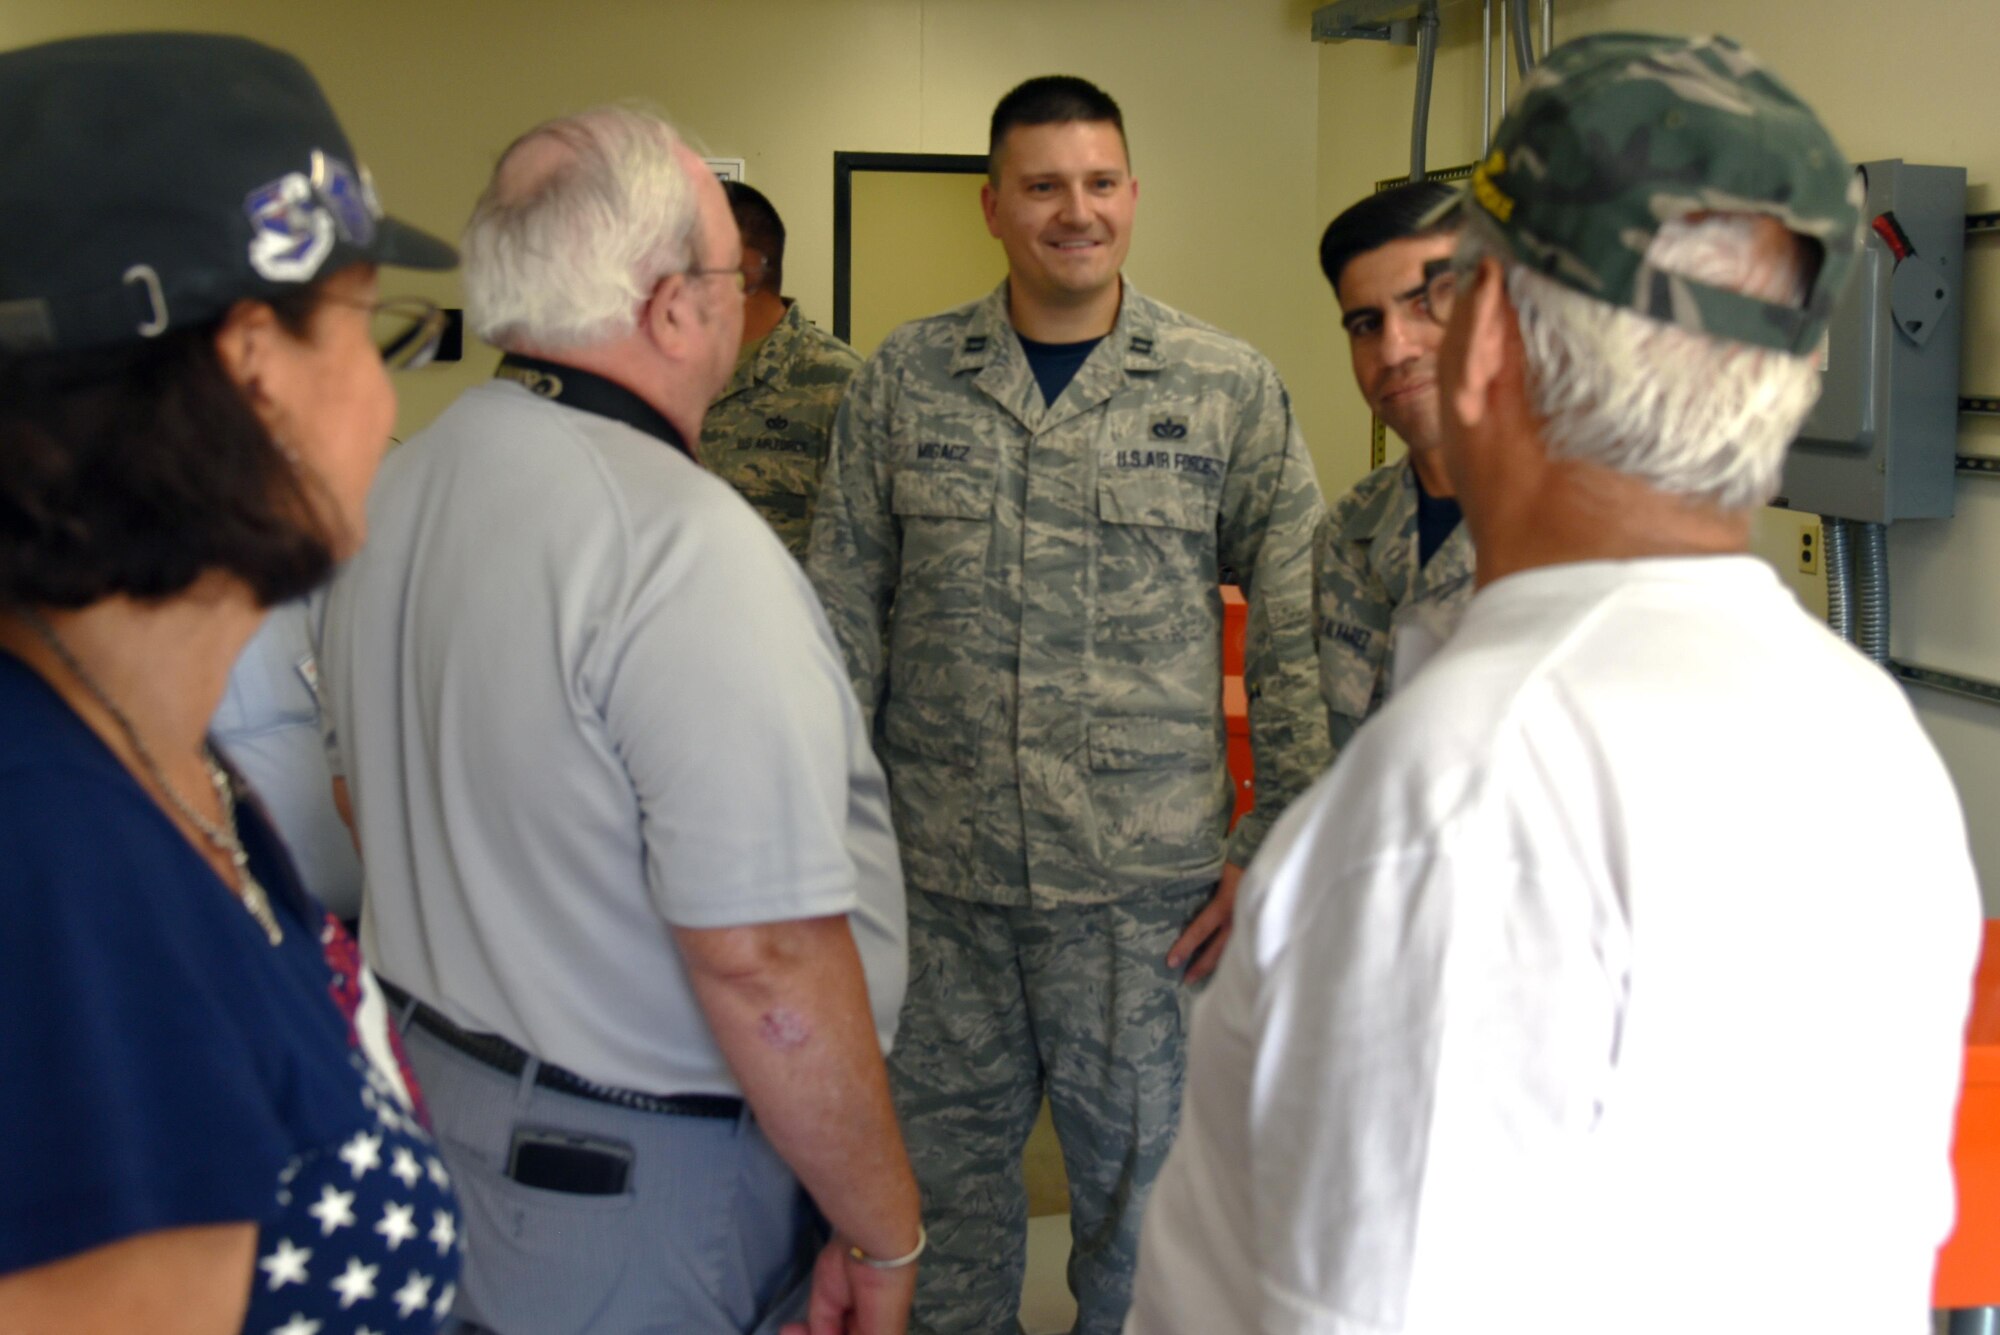 Capt. Ryon Migacz, 366th Training Squadron director of operations, speaks with members of the 555th Red Horse Squadron Vietnam Vets Reunion group during their visit, July 21, 2017. The 355th Red Horse Squadron was one of the first civil engineering units to arrive in Vietnam during the war. (U.S. Air Force photo by 2nd Lt. Jacqueline Jastrzebski)